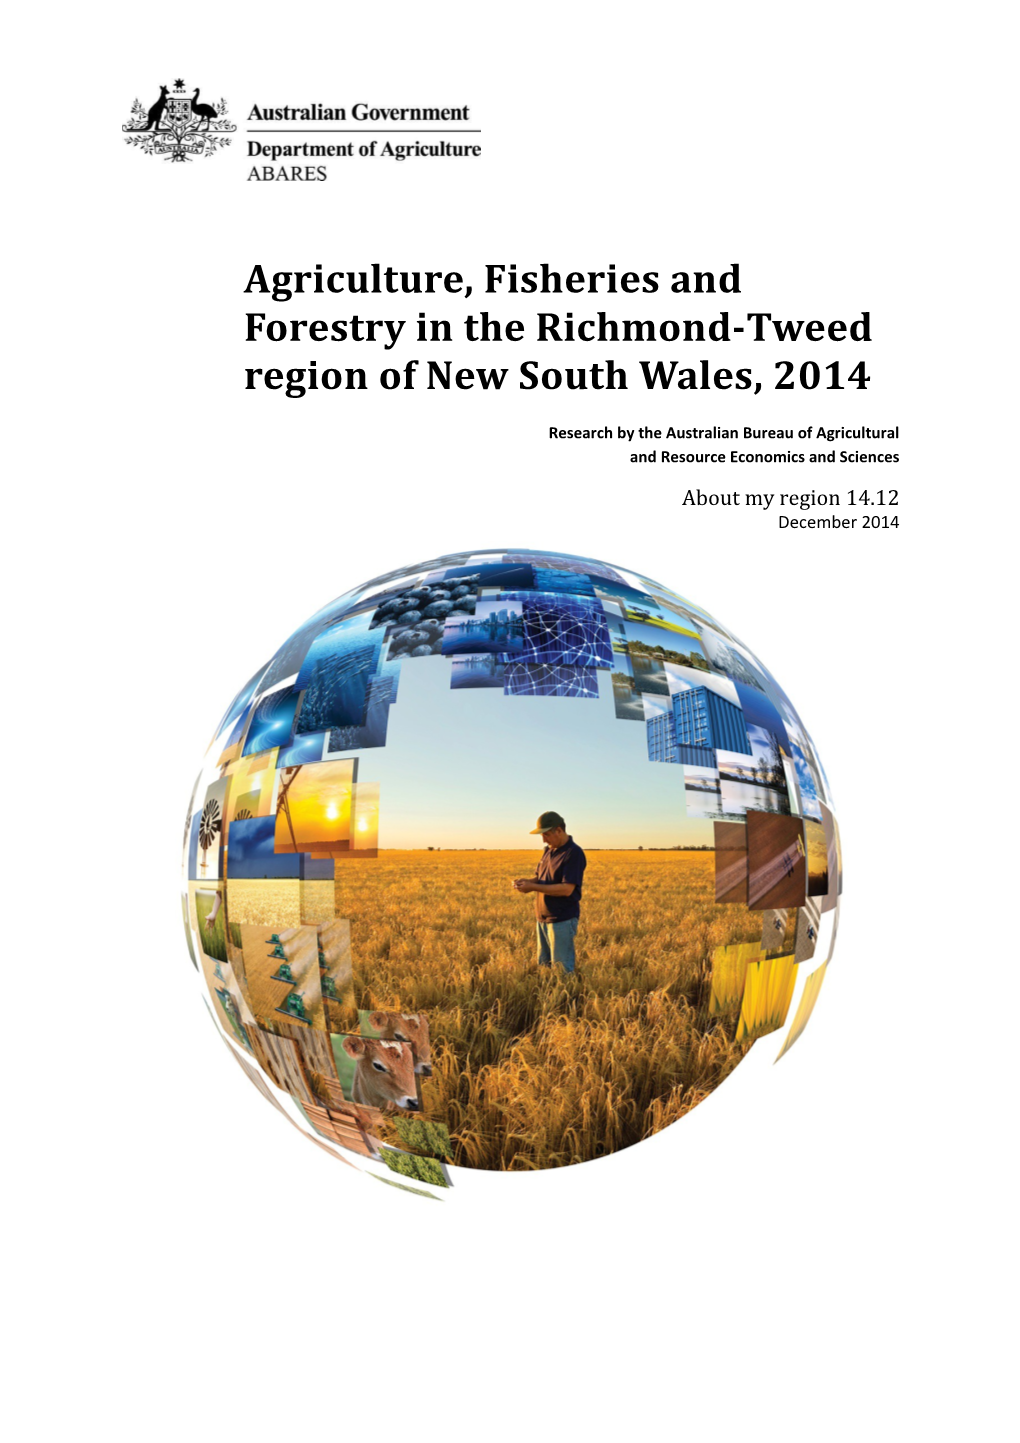 Agriculture, Fisheries and Forestry in the Richmond-Tweed Region of New South Wales, 2014